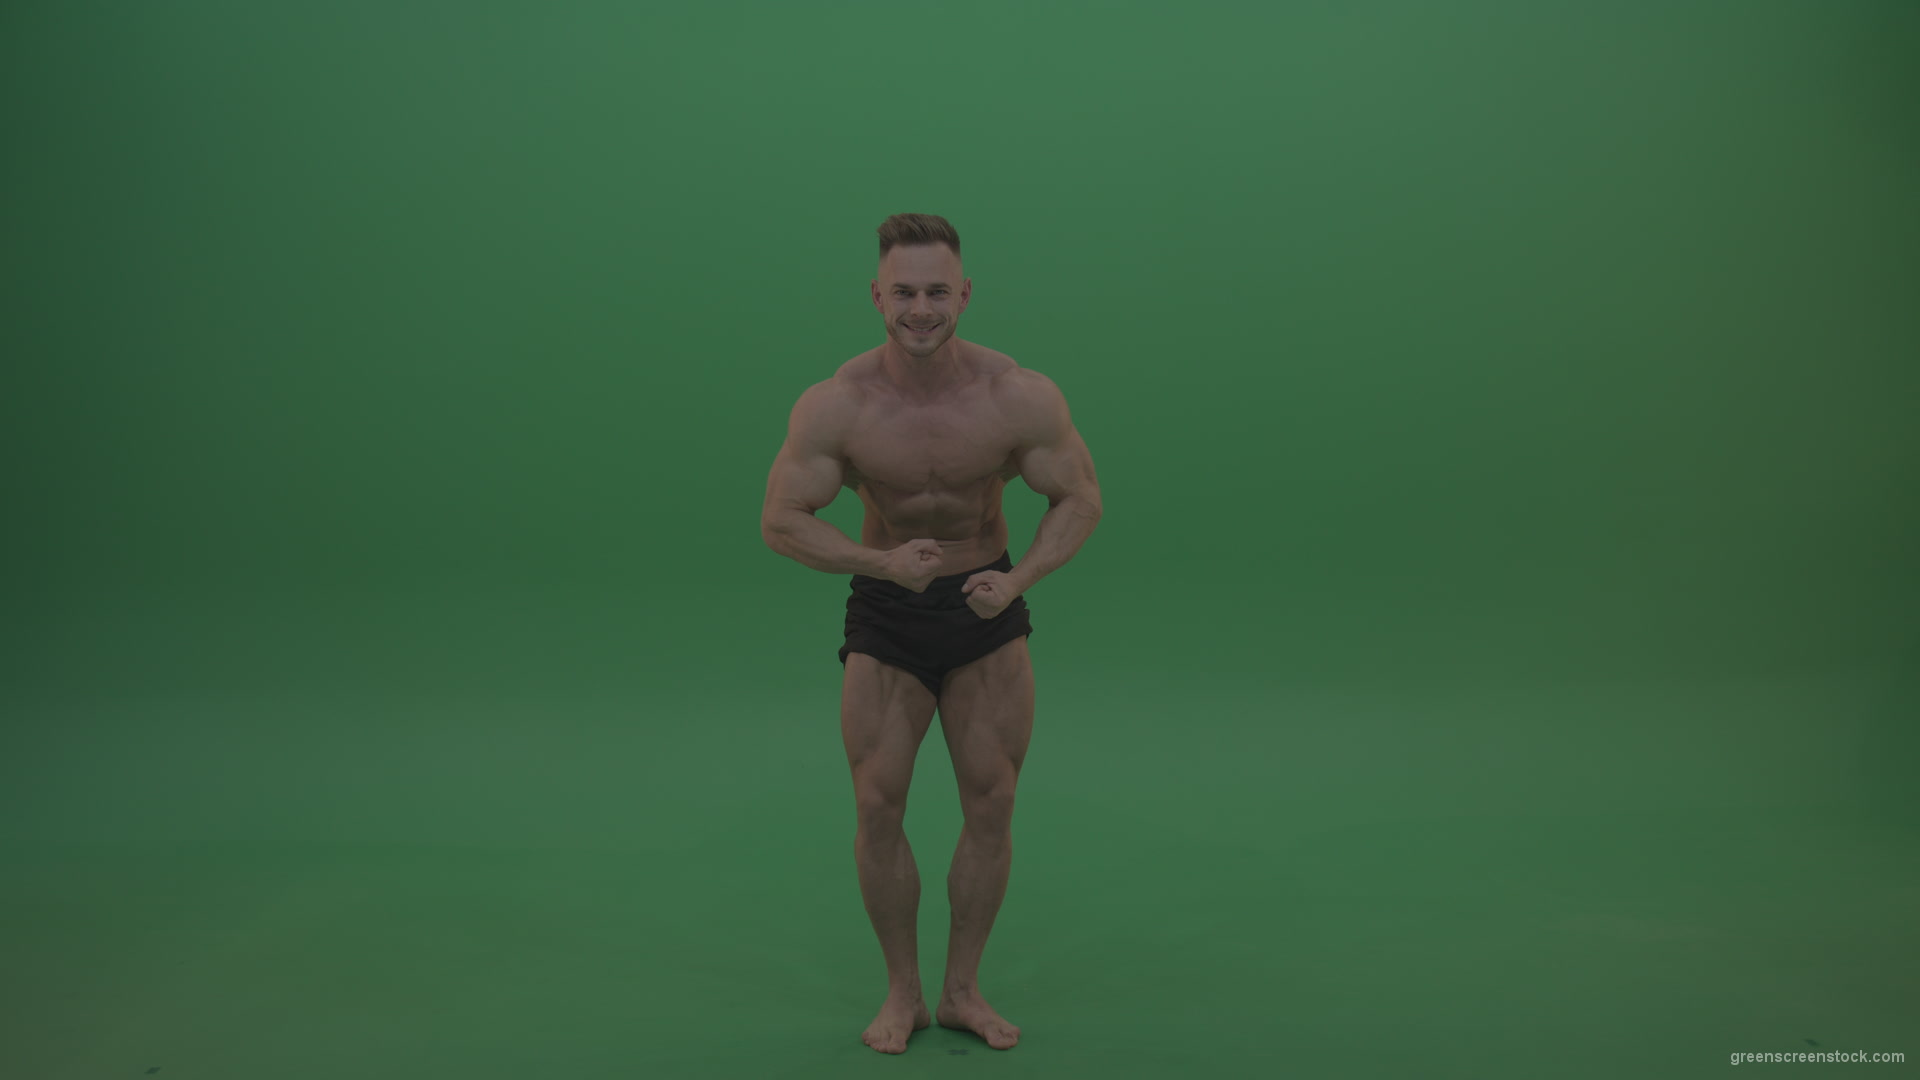 Young_Sportsman_Showing_Front_Double_Biceps_And_Thigh_Muscles_Bodybuilding_Positions_On_Gren_Screen_Wall_Background_008 Green Screen Stock